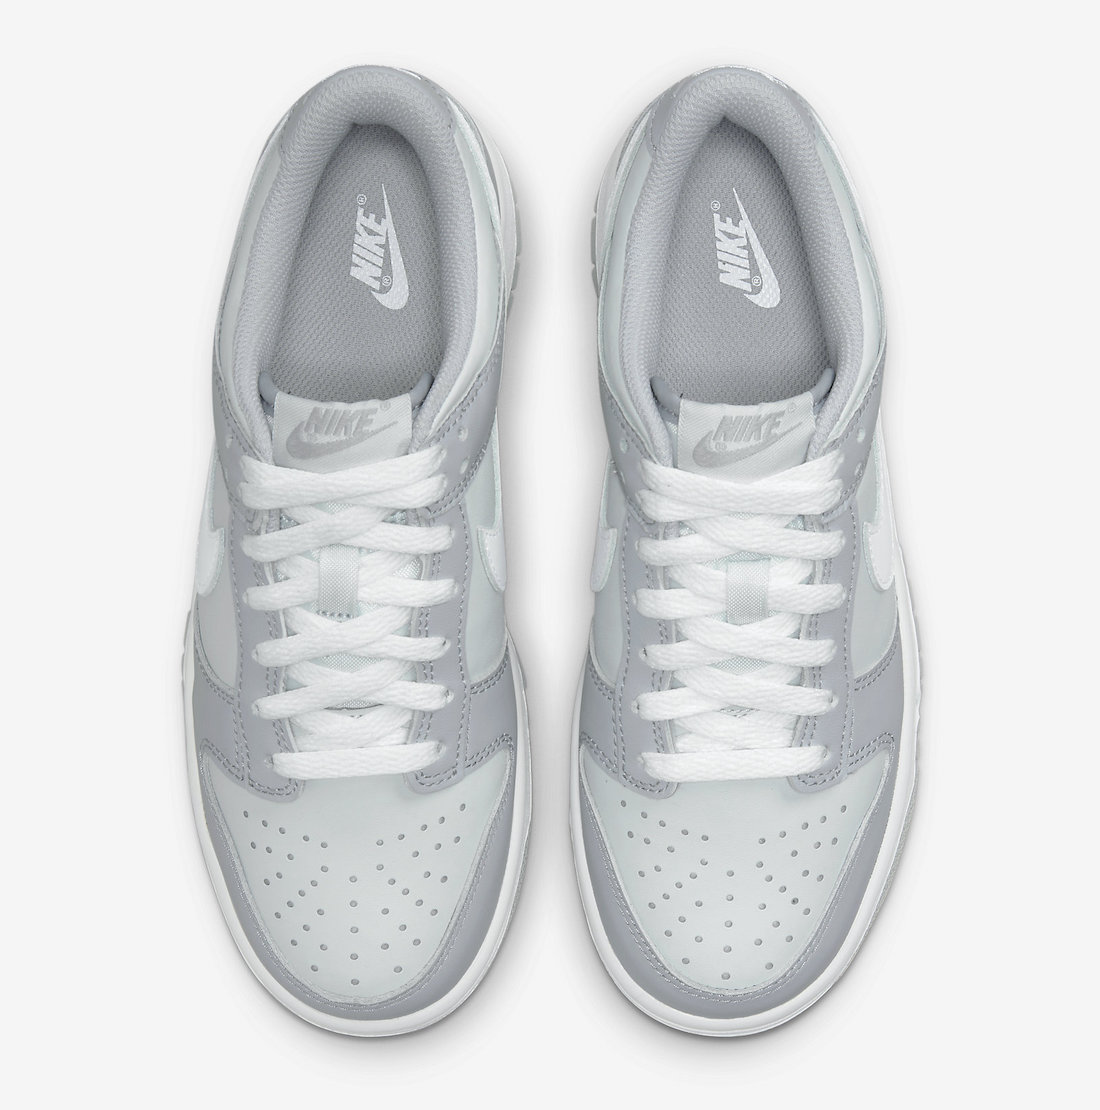 Nike Dunk Low GS Grey DH9765 001 Release Date 3